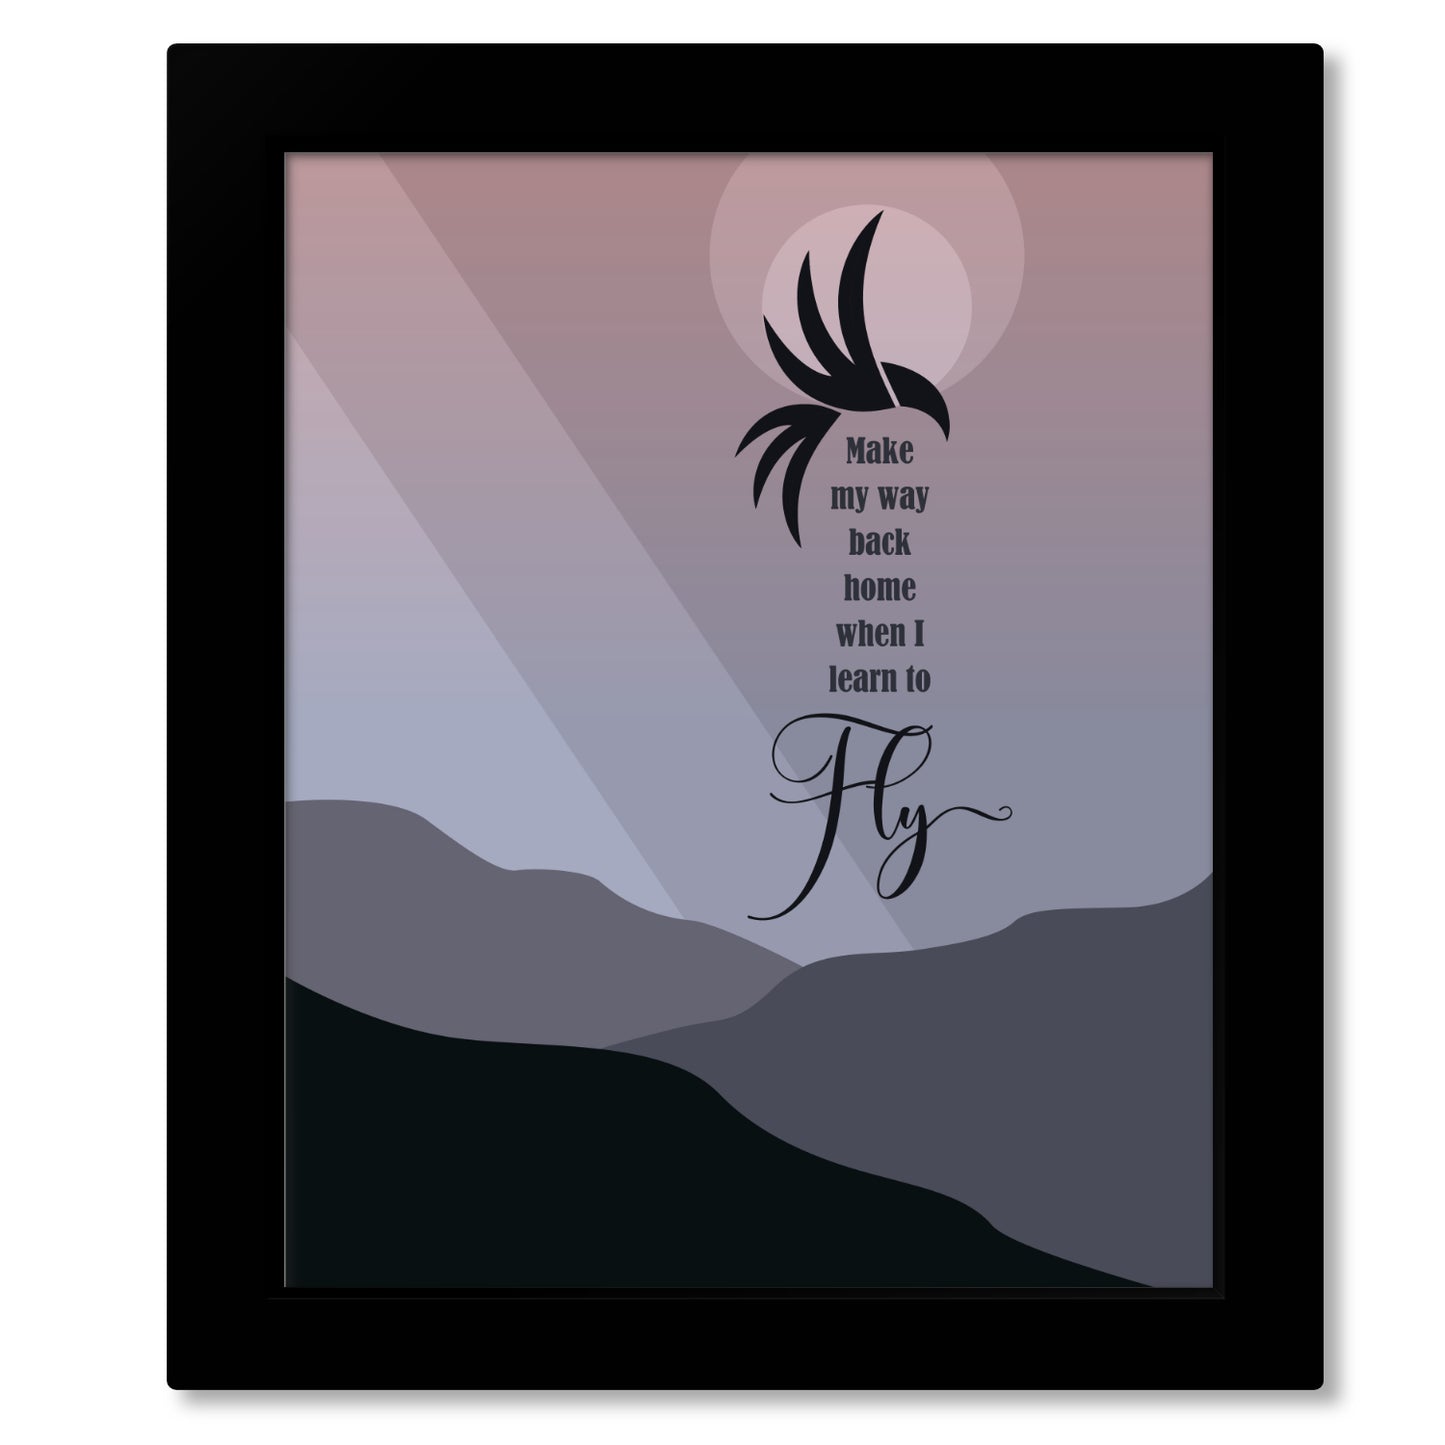 Learn to Fly by the Foo Fighters - Song Lyric Wall Art Prints Home Decor Custom Design